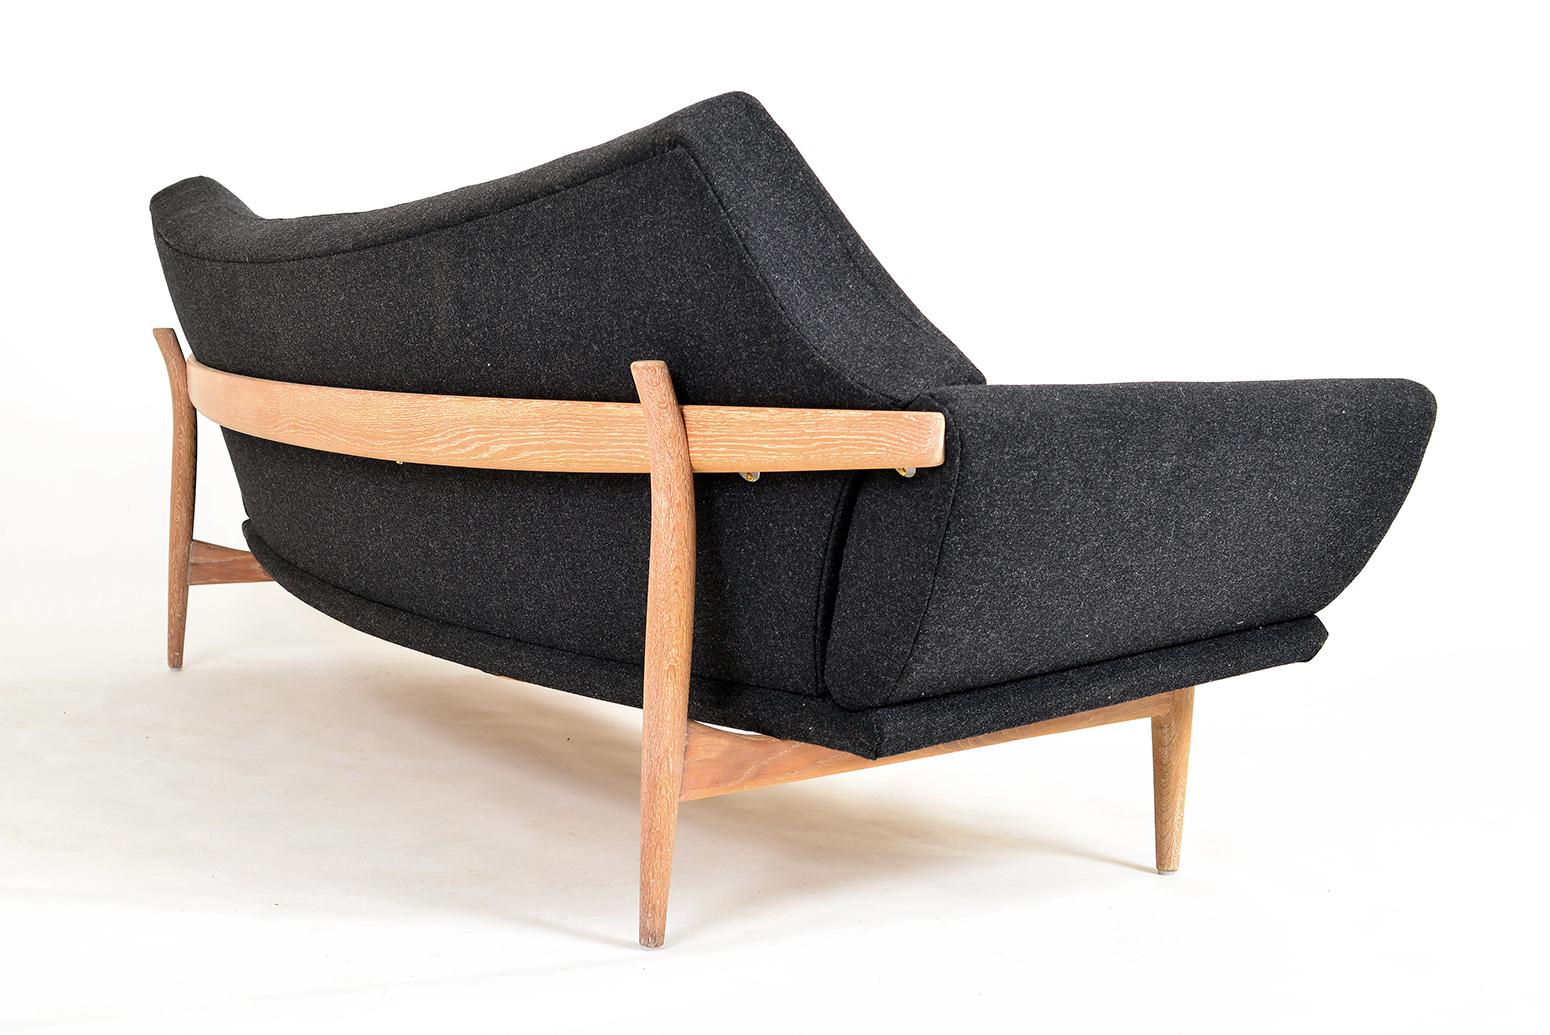 1960s Swedish Curved Sofa & Chair Johannes Andersen Trensums Mid-Century Modern For Sale 5